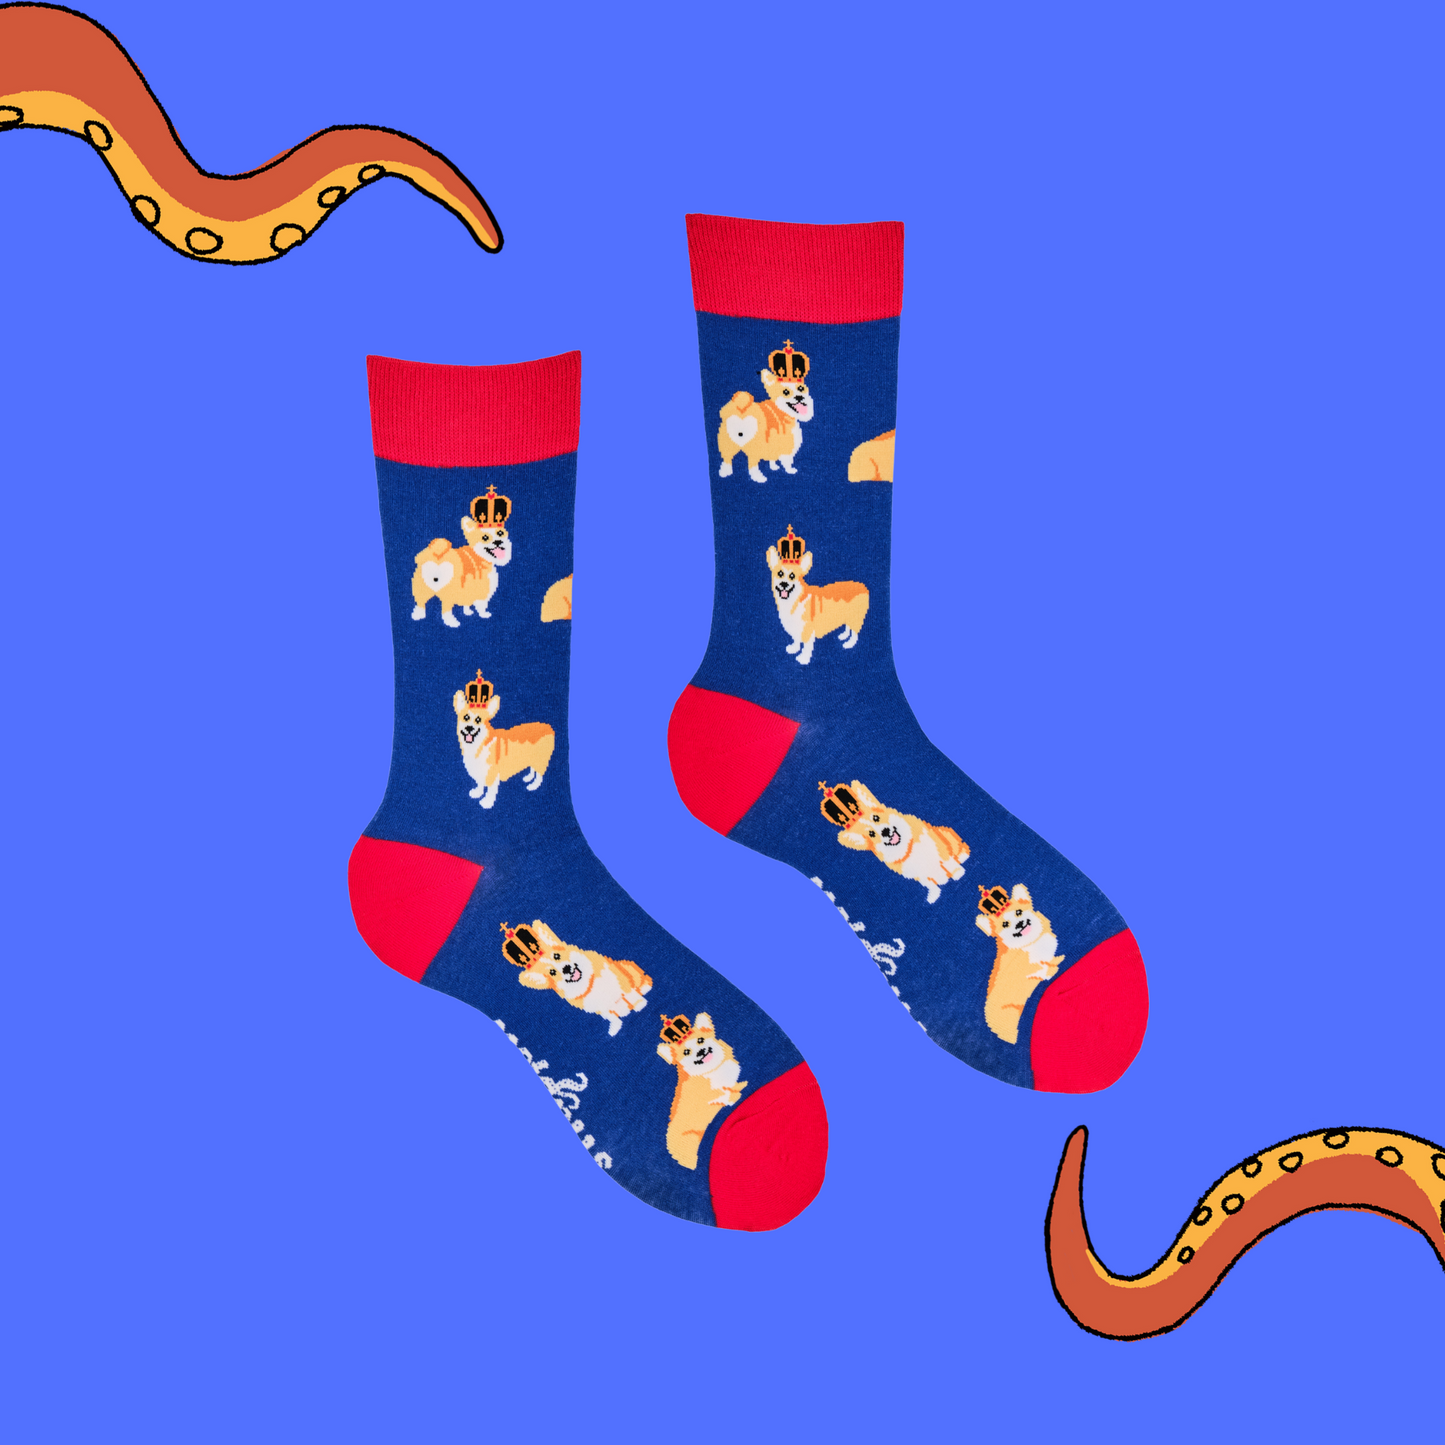 A pair of socks depicting corgis wearing crowns. Blue legs, red cuff, heel and toe.